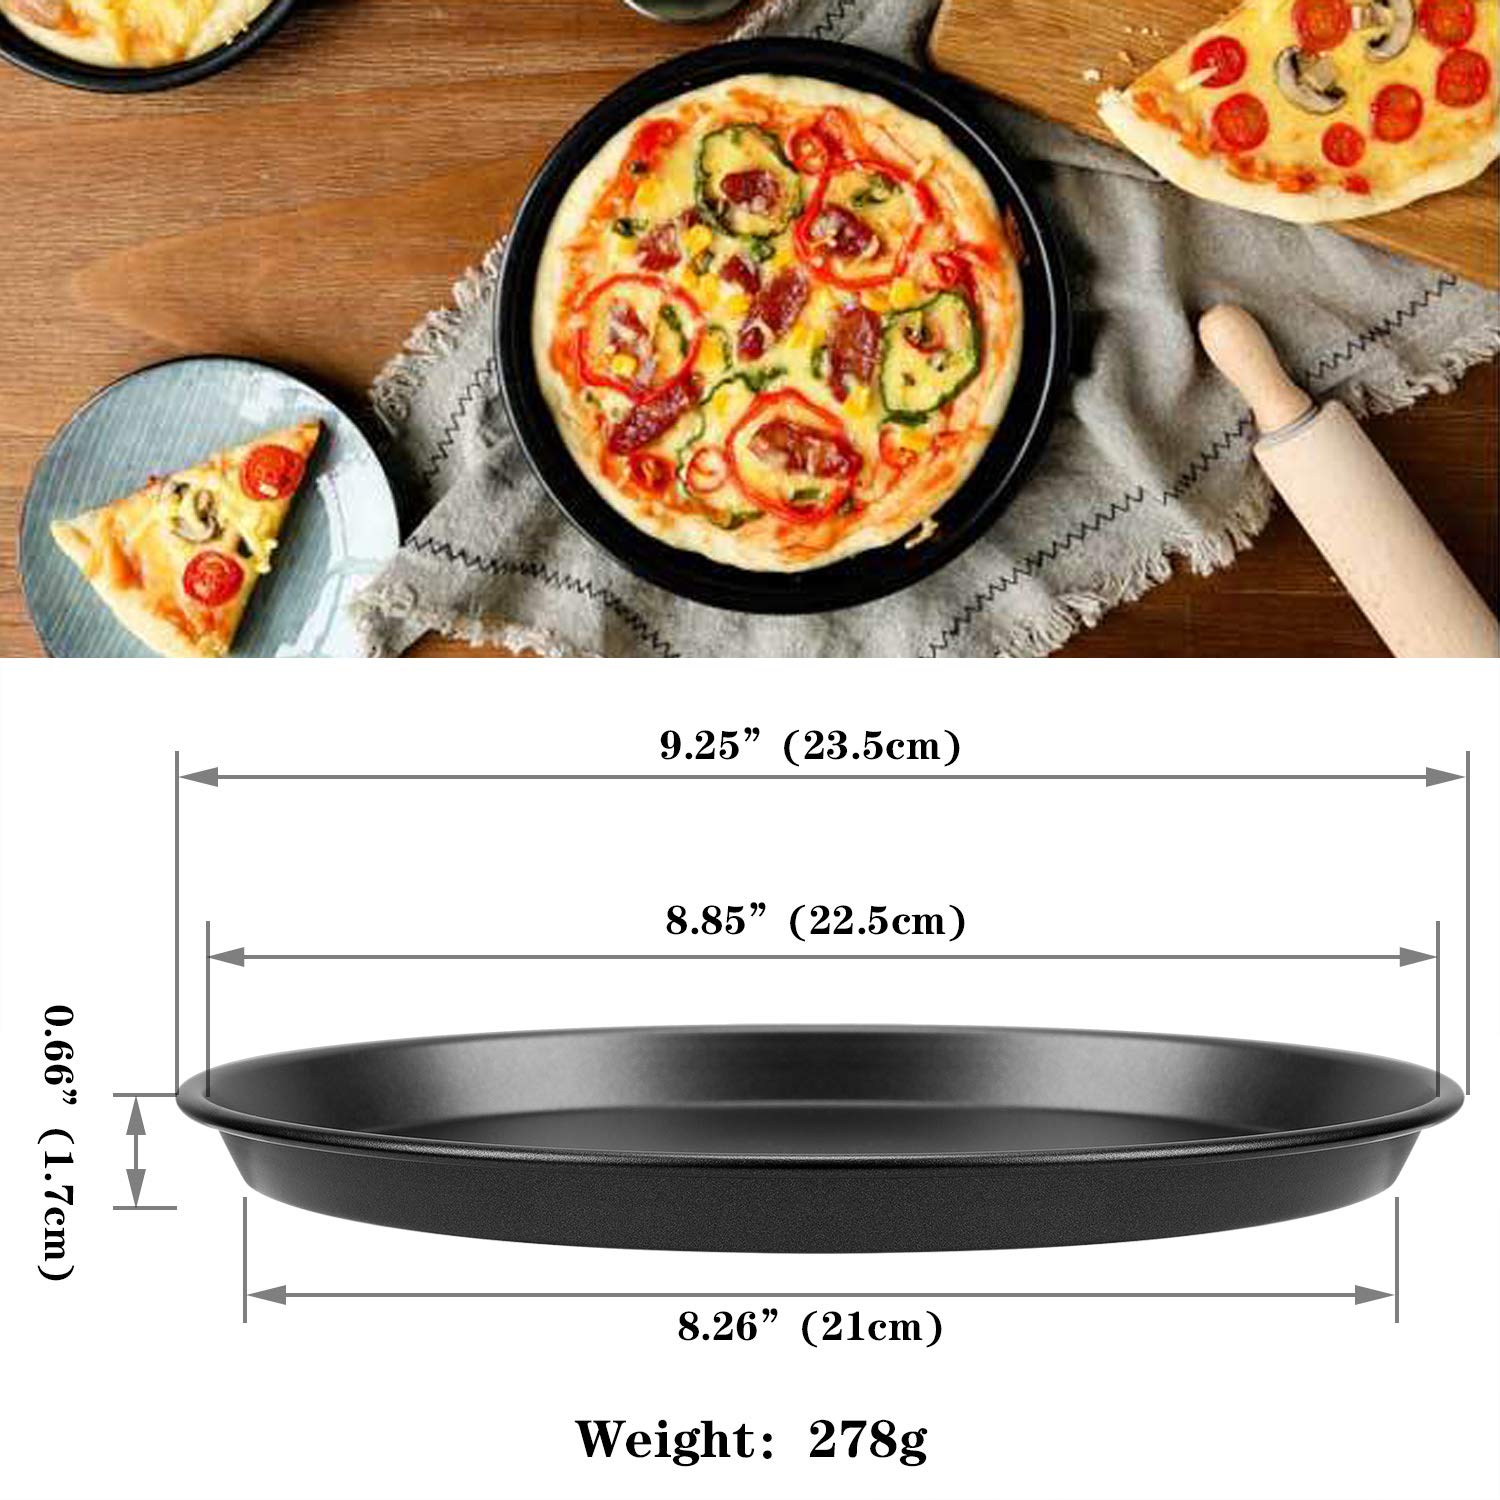 Thicken Pizza Pan 9 Inch, 2 Pack Carbon Steel Round Pizza Crisp Baking Pan 0.6mm Thickness